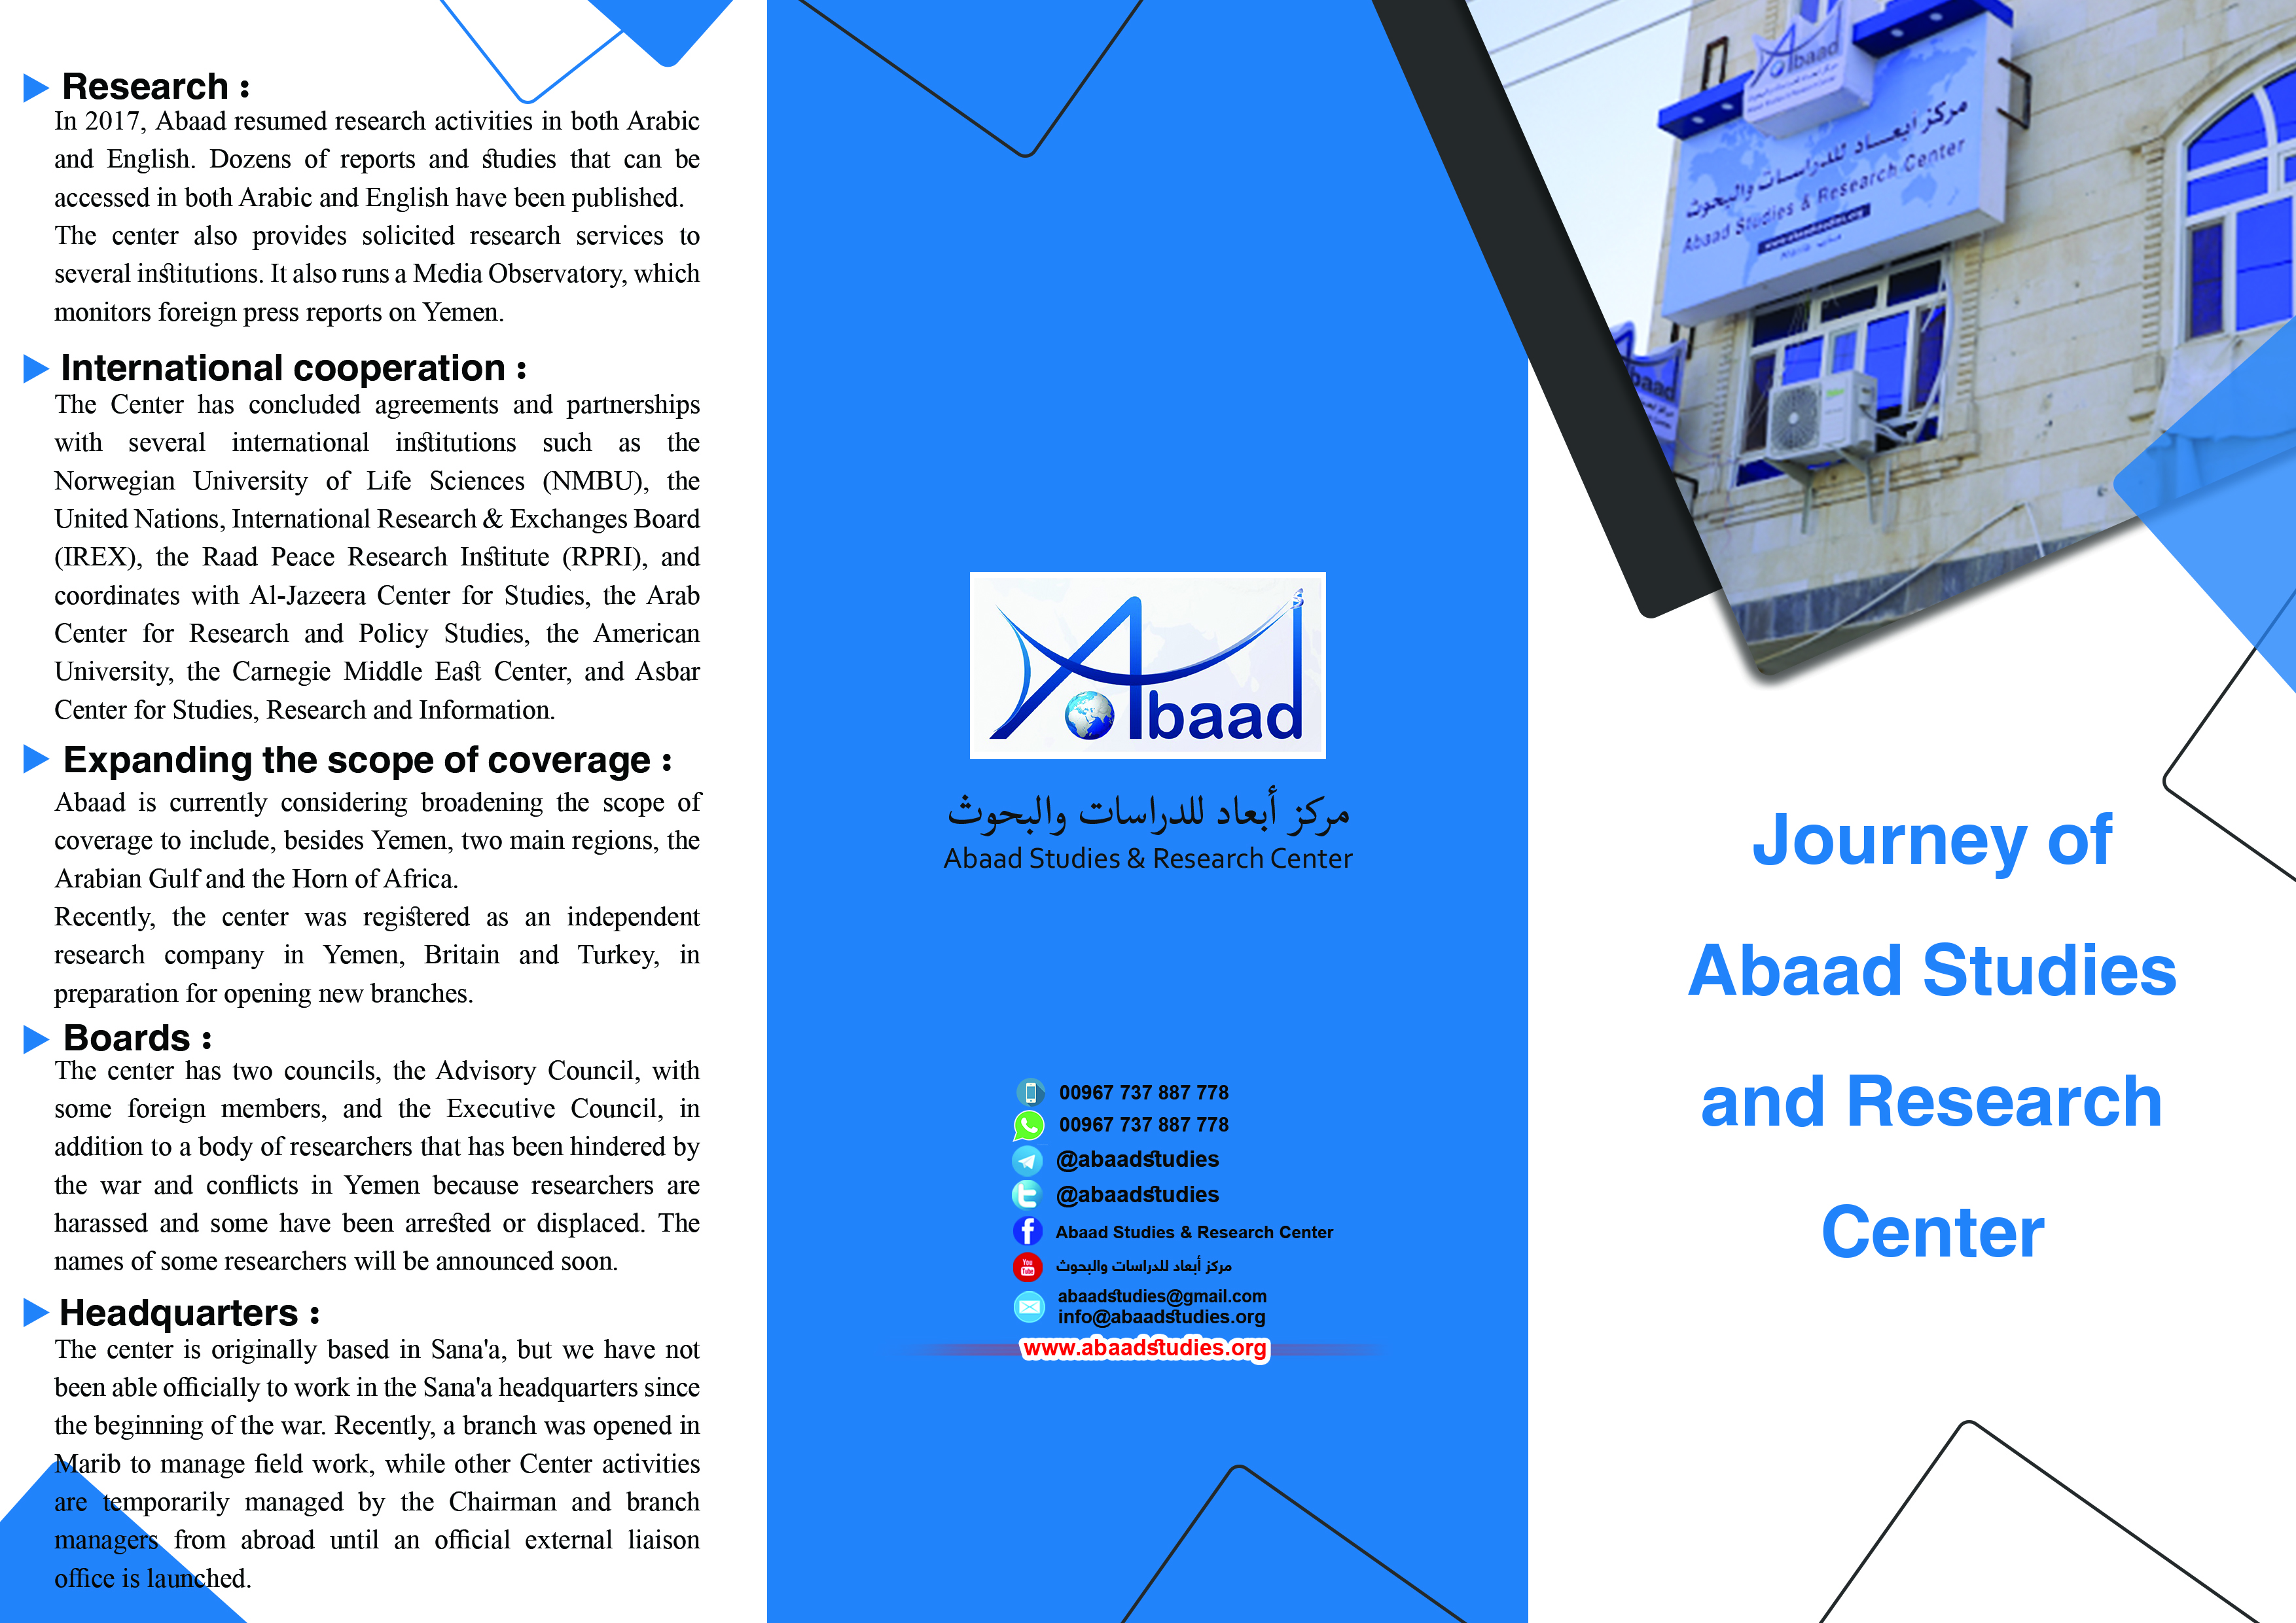 Journey of Abaad Studies and Research Center